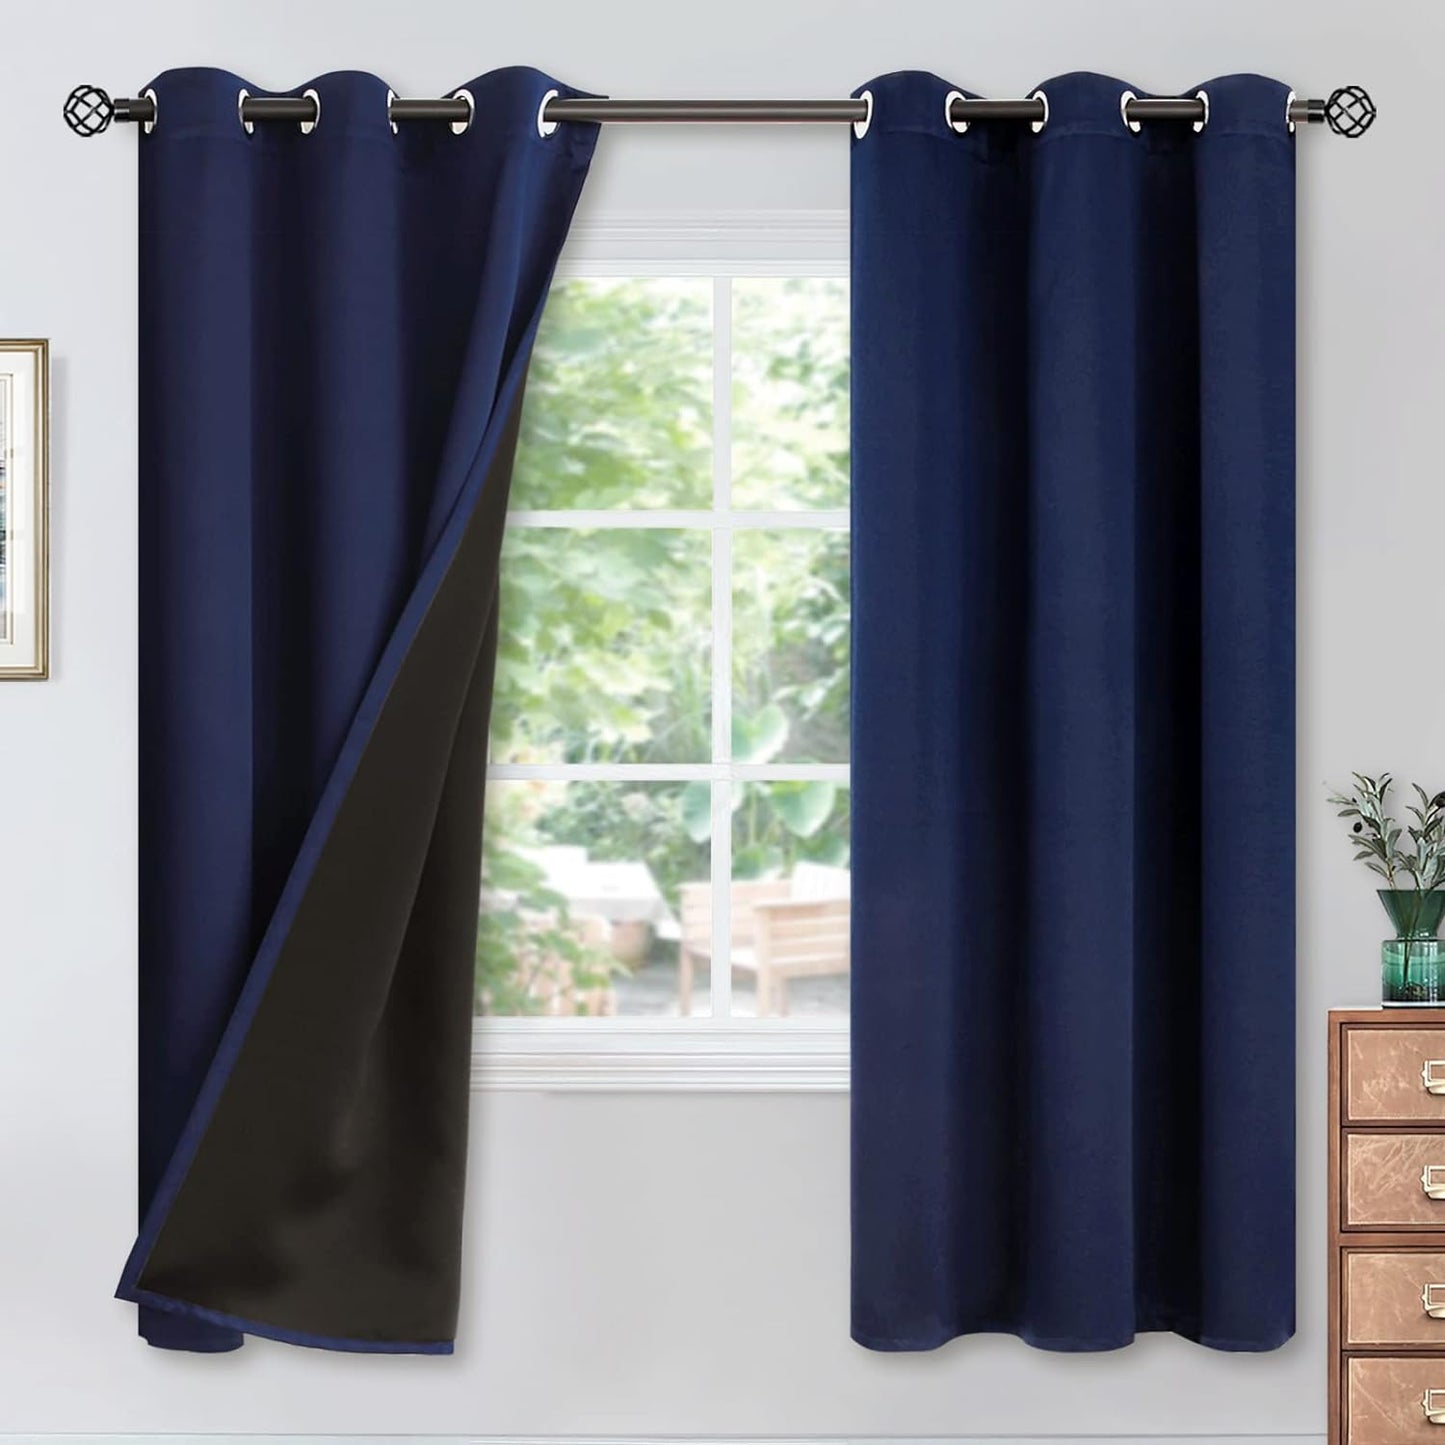 Youngstex Black 100% Blackout Curtains 63 Inches for Bedroom Thermal Insulated Total Room Darkening Curtains for Living Room Window with Black Back Grommet, 2 Panels, 42 X 63 Inch  YoungsTex Navy 42W X 72L 